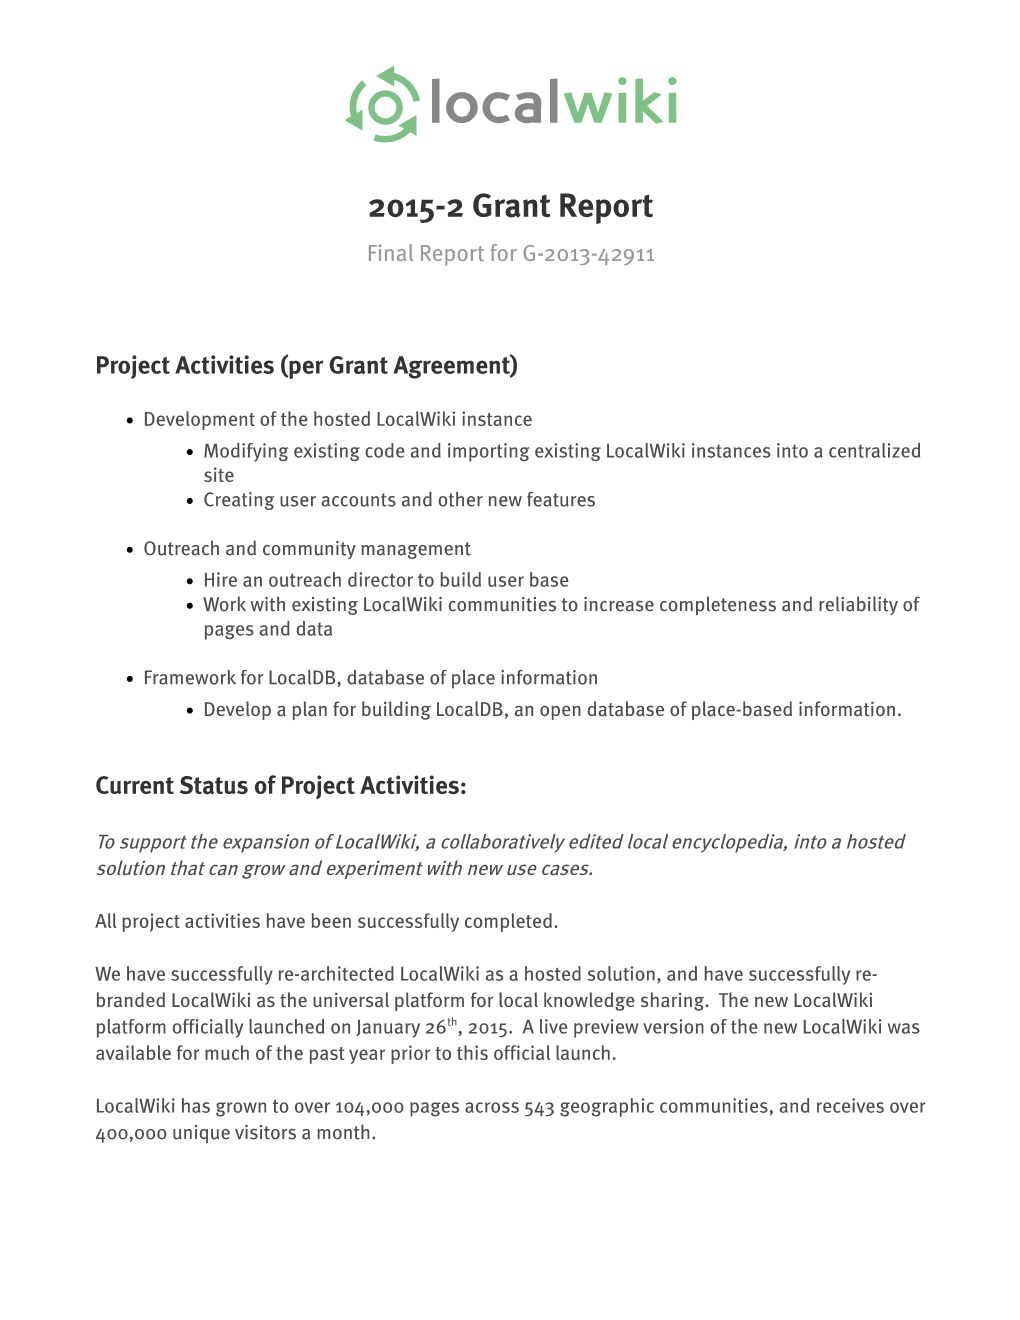 2015-2 Grant Report Final Report for G-2013-42911